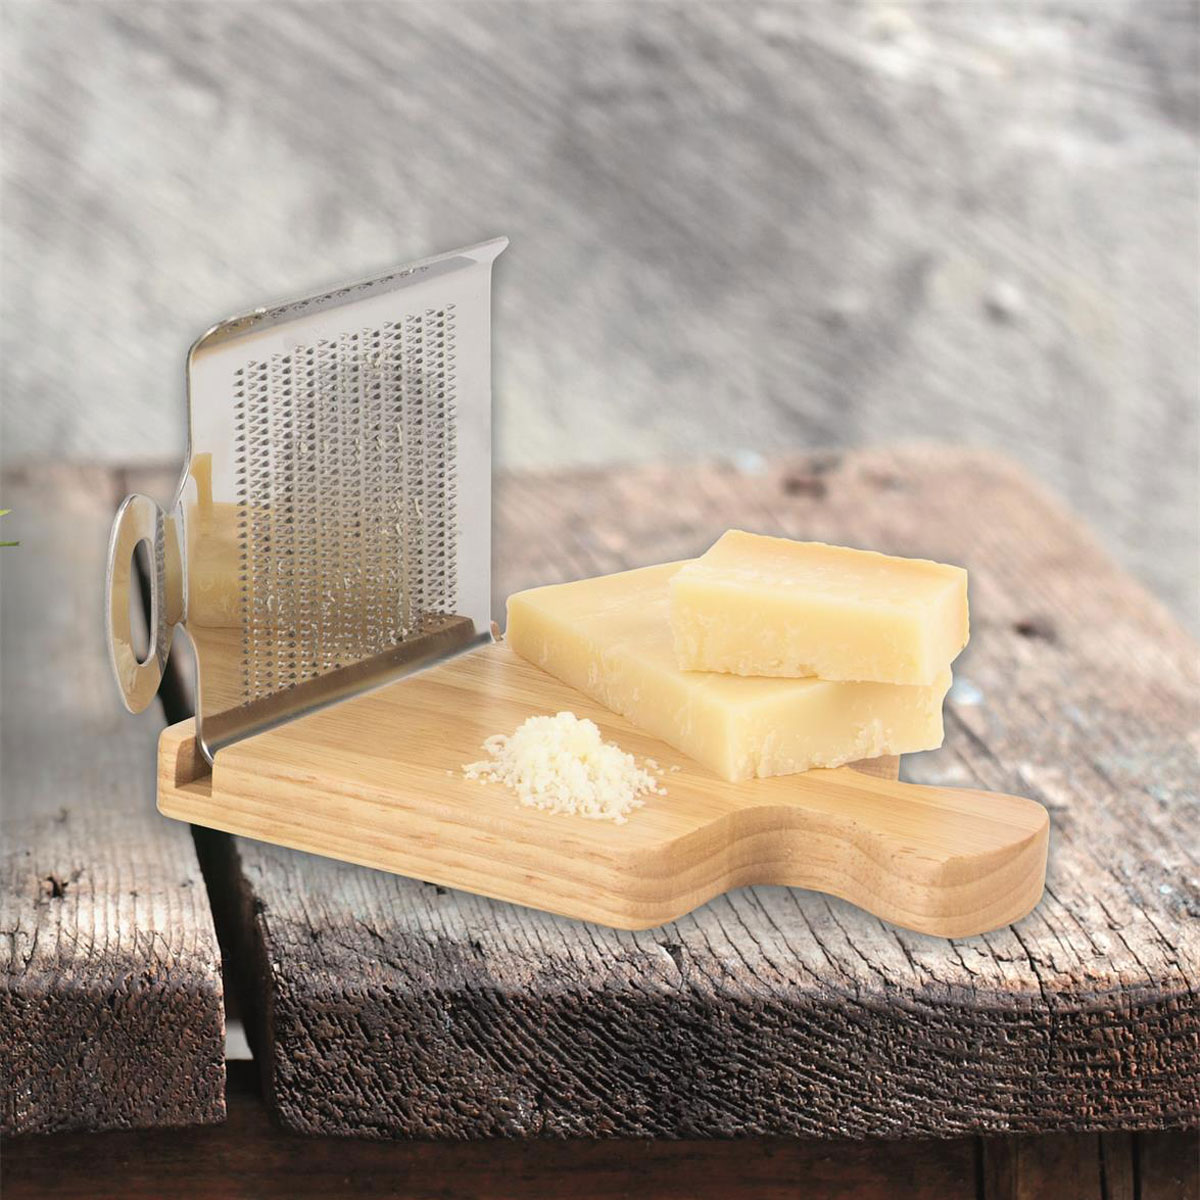 Parmesan grater with its multi-purpose board